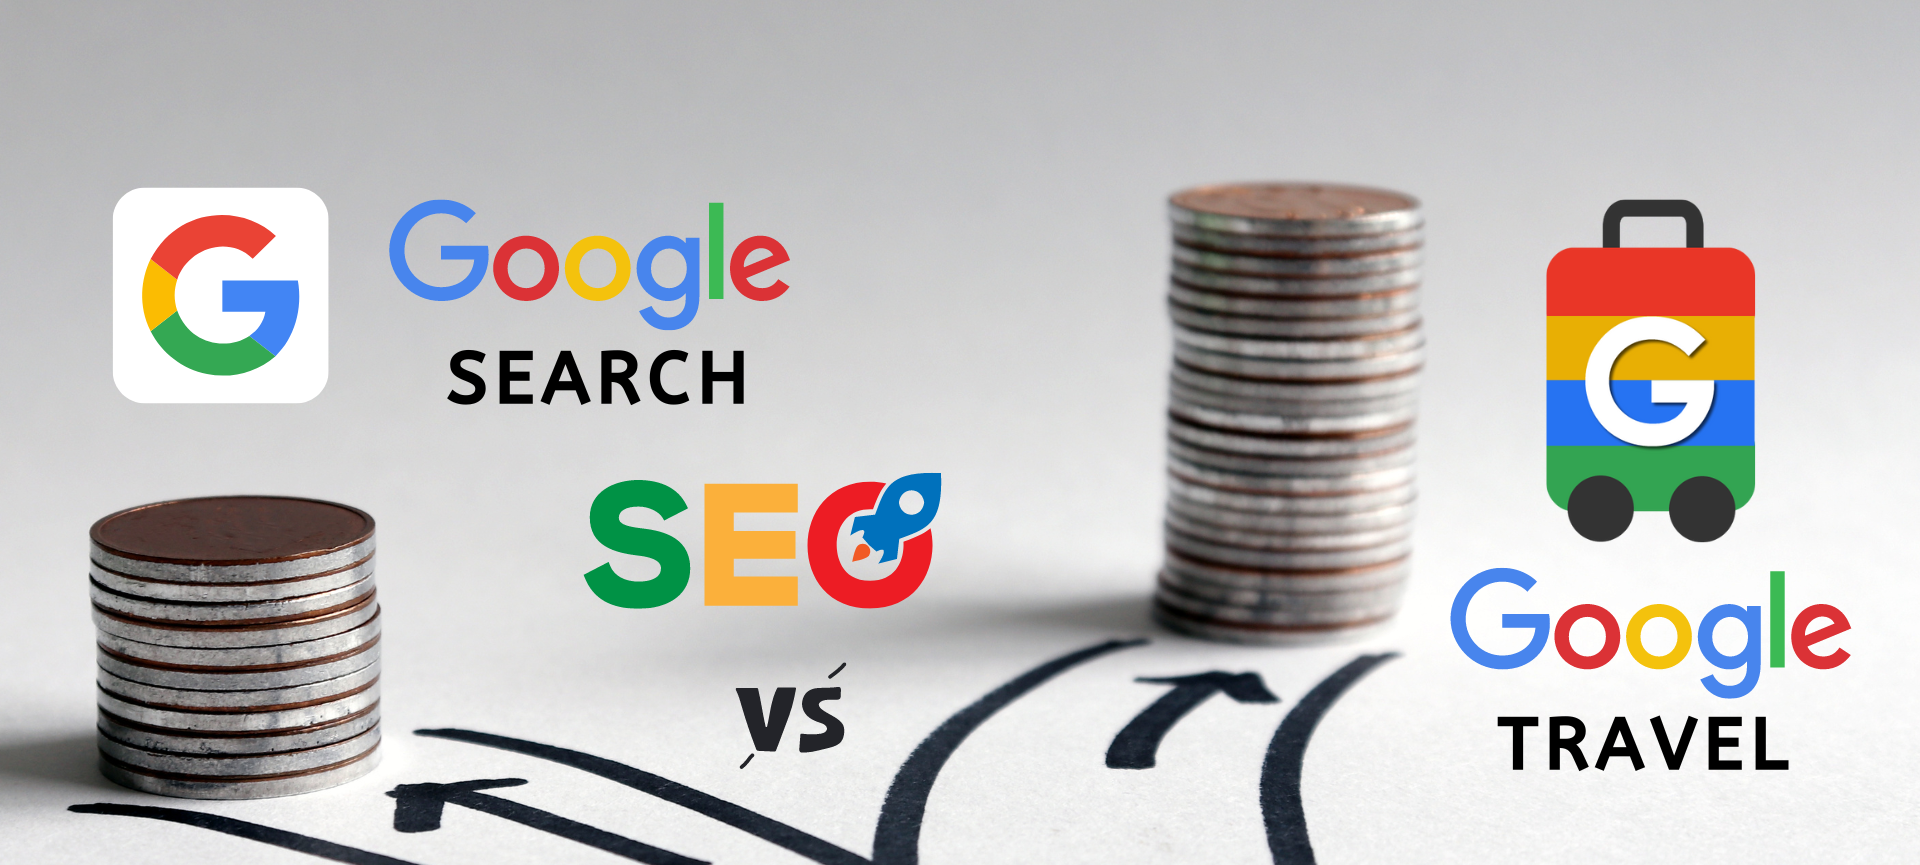 stacks of coins and a road splitting for google search vs travel